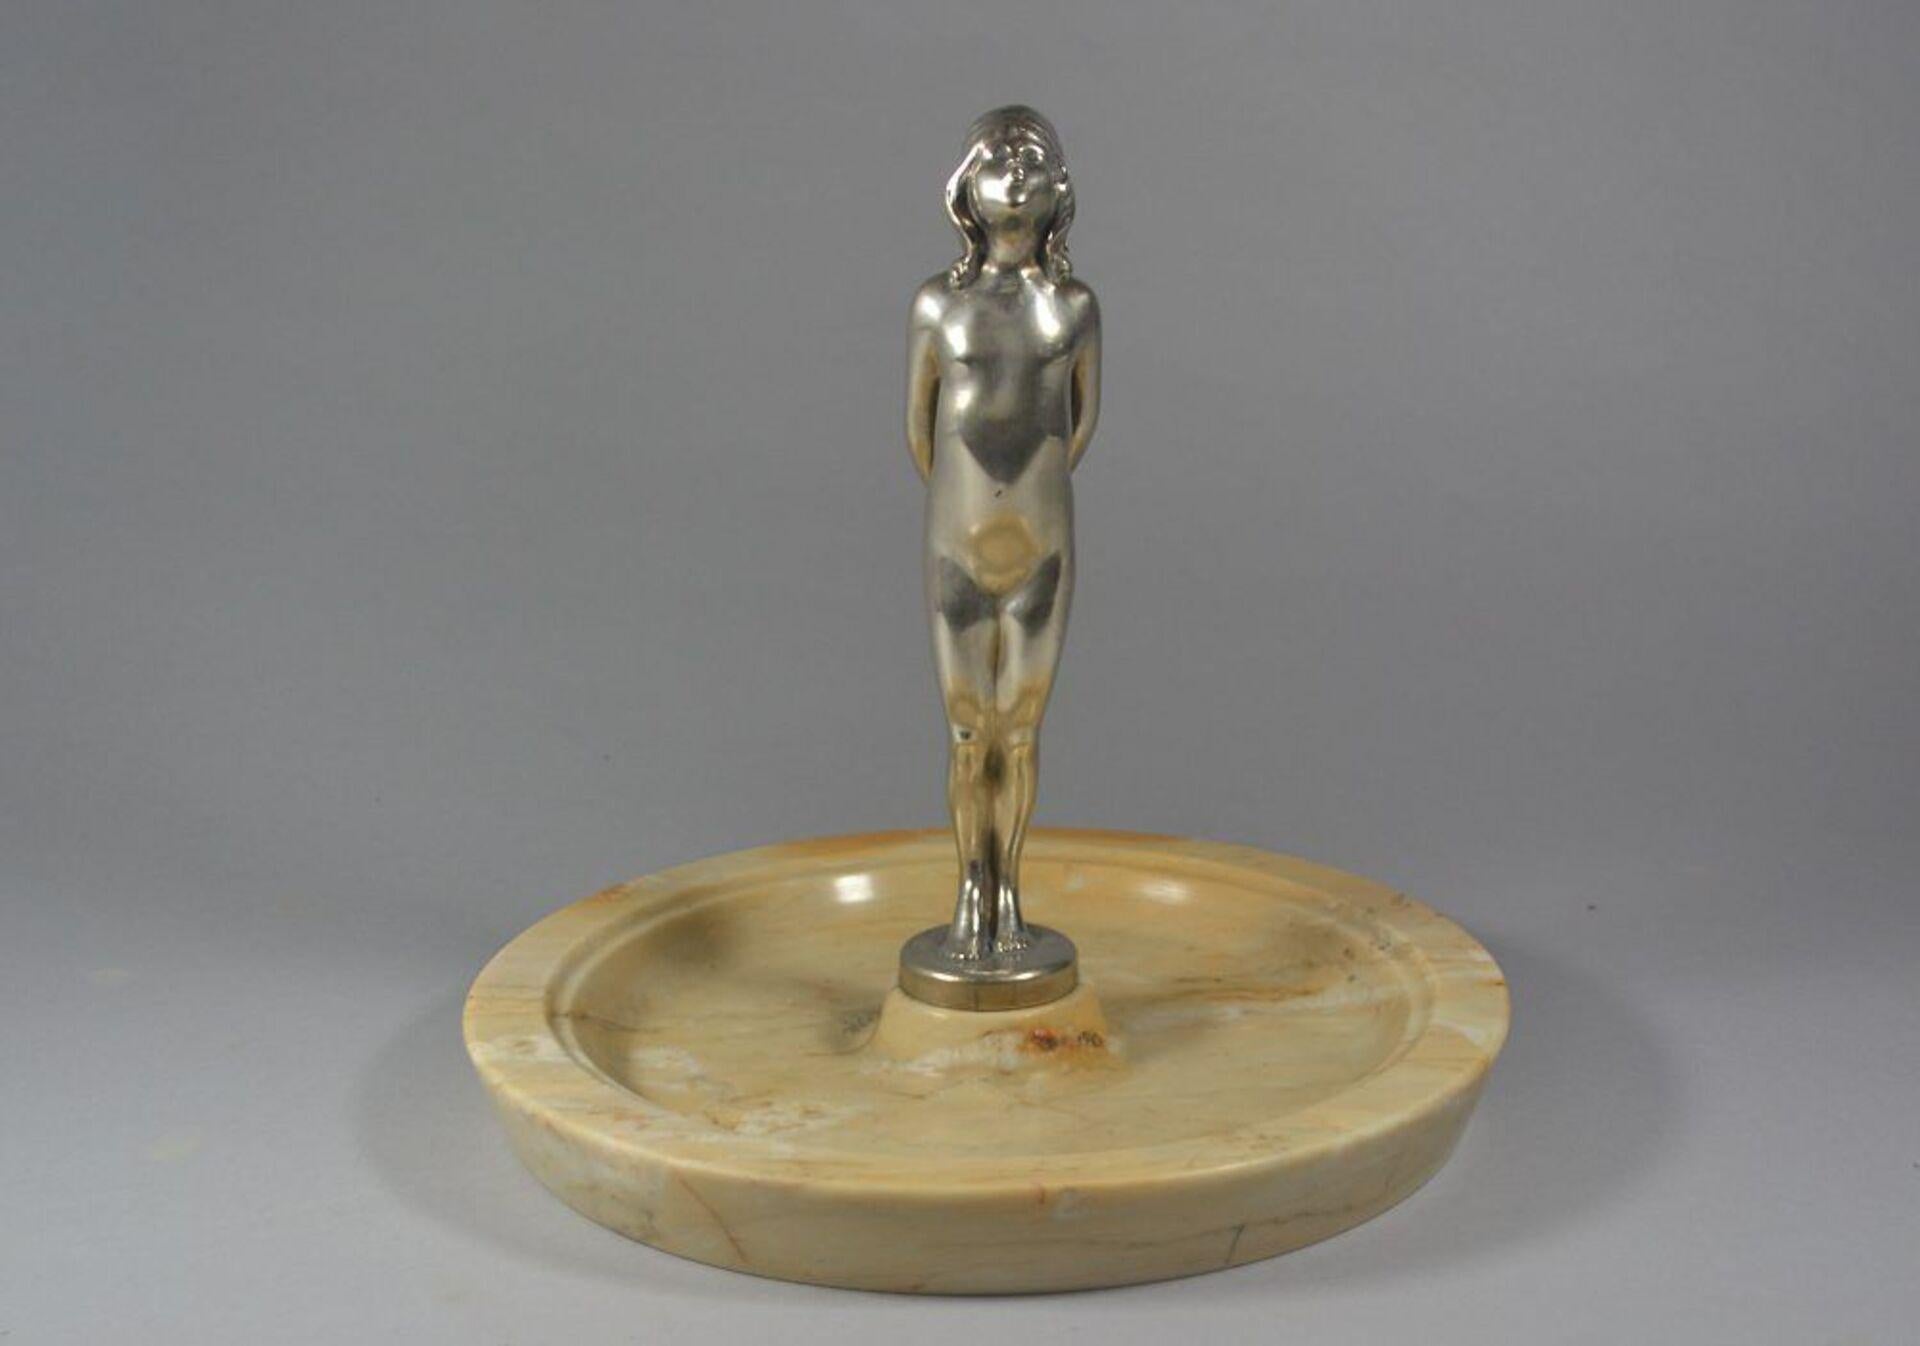 Rare and lovely bronze figure of a young girl mounted on a large center piece onyx base.
Signed in onyx.
Excellent condition.
French. Circa 1930.

27cm diameter. 27cm high.